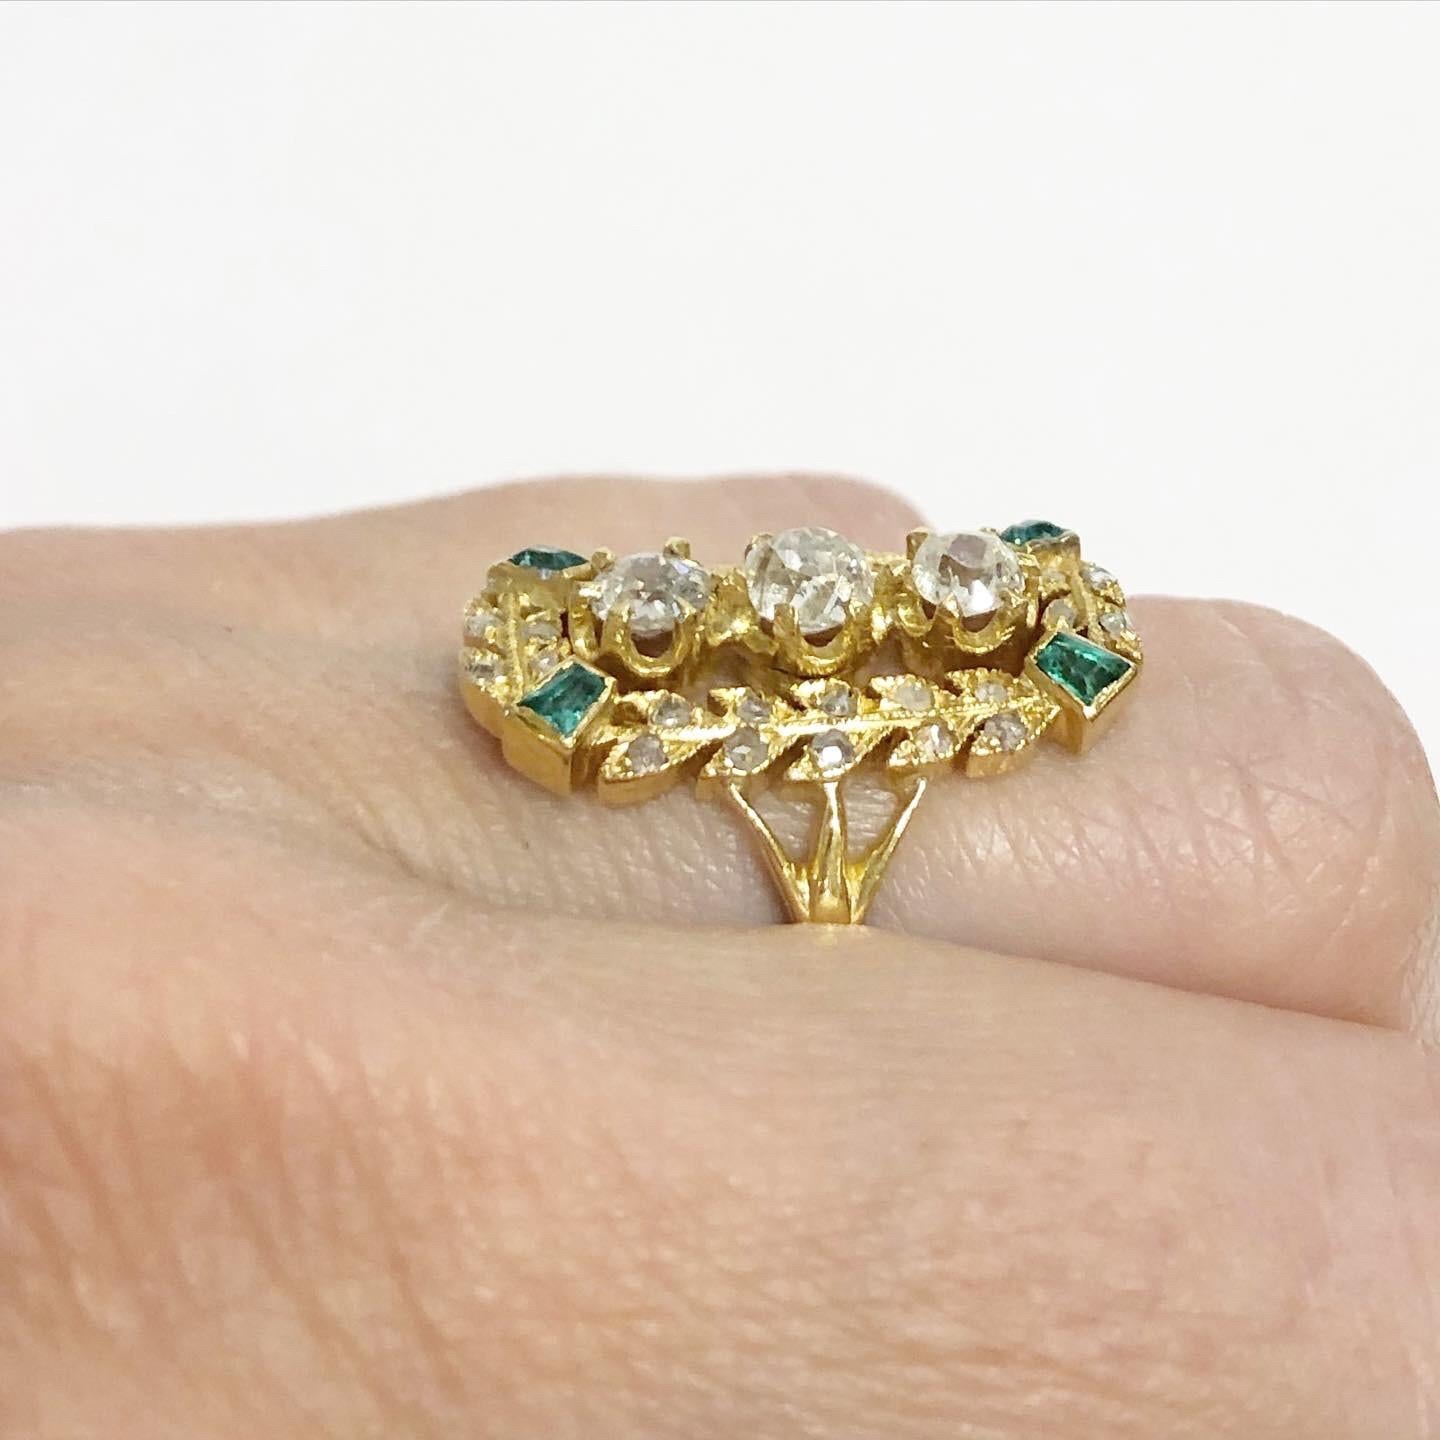 Victorian 18k Yellow Gold, Diamonds and Emeralds Cocktail Ring For Sale 2